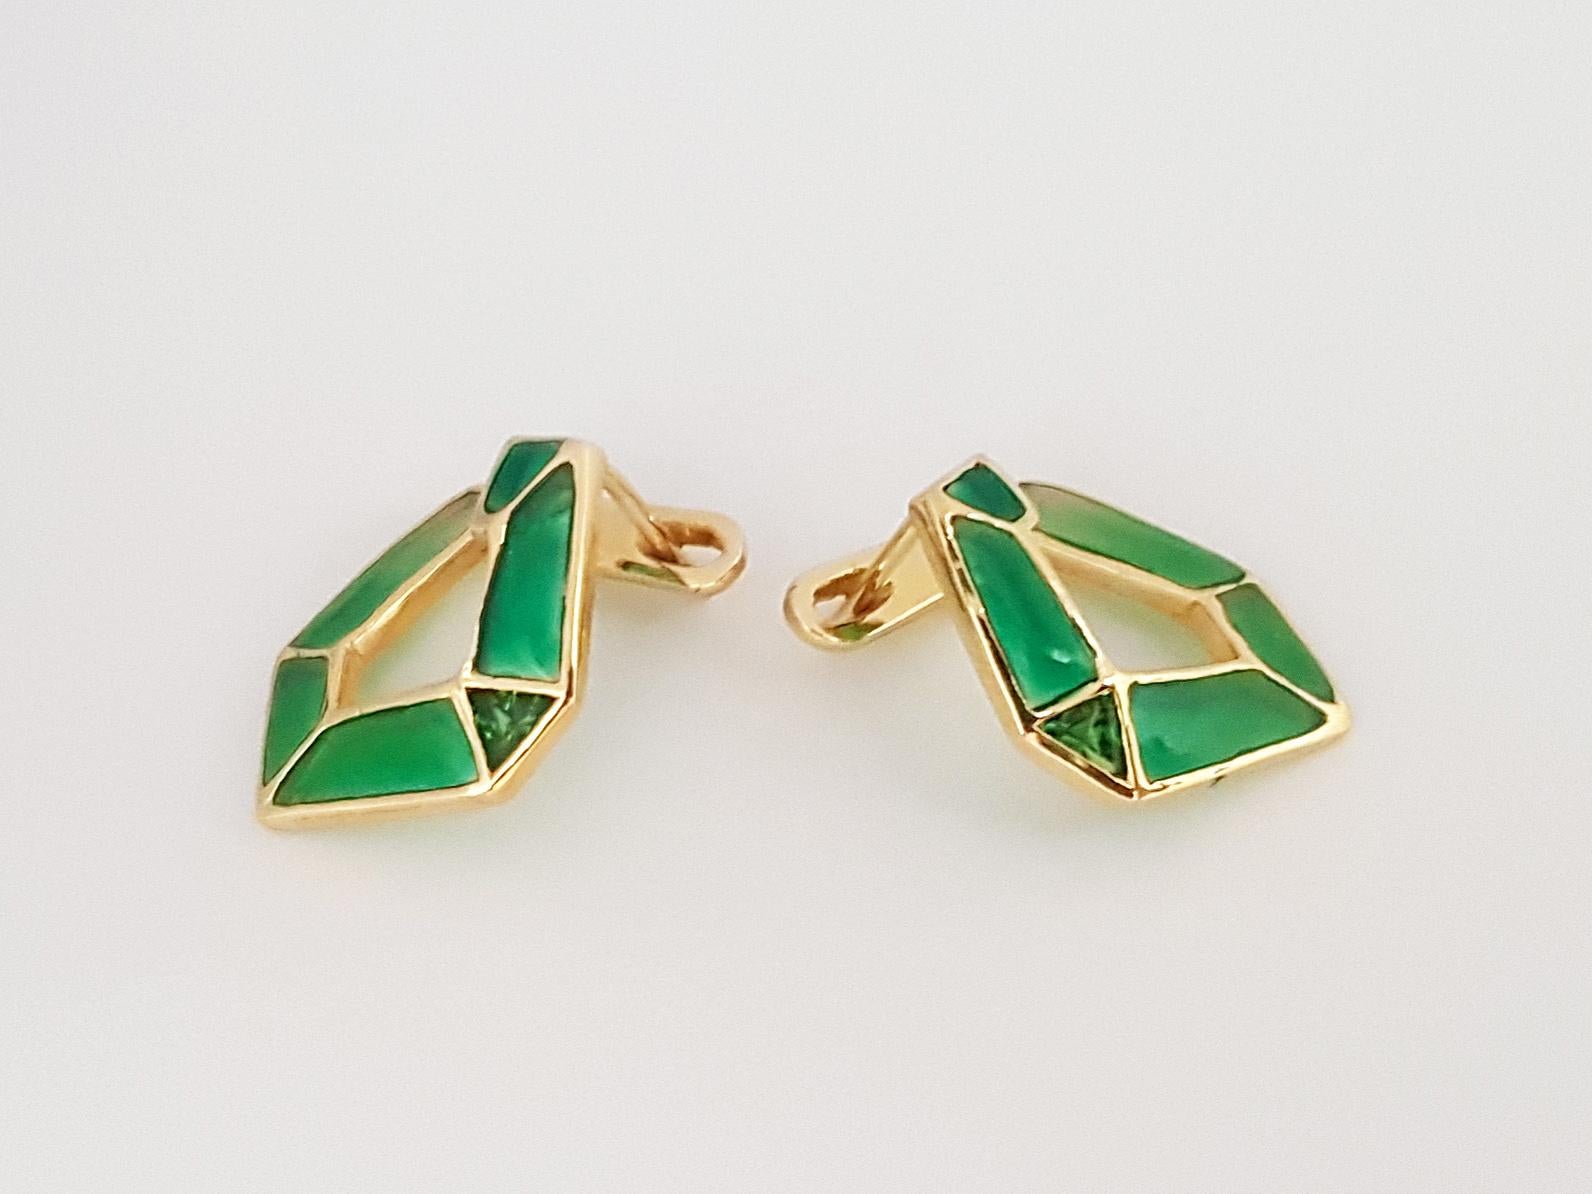 Mixed Cut Origami Link No. 5 Tsavorite with Enamel Earrings 18K Yellow Gold Petite For Sale